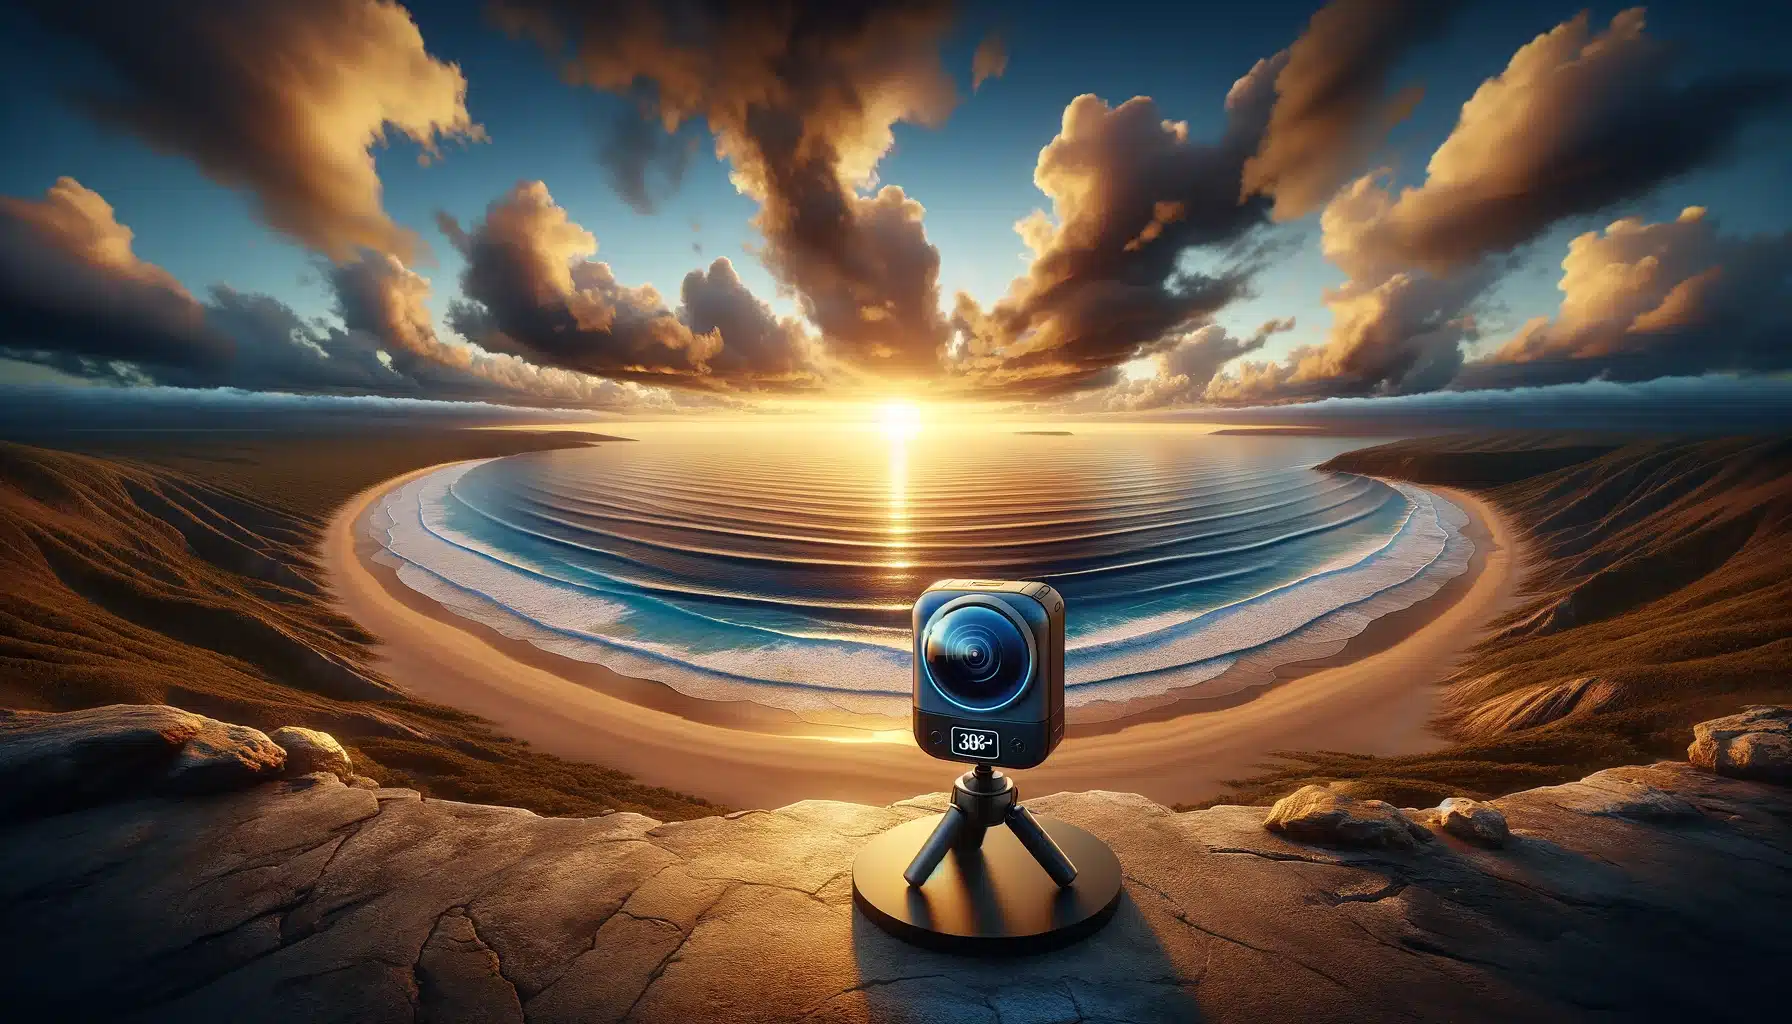 A All-around snapshot camera on a tripod captures a view of a coastal landscape at sunset, with a sandy beach, gentle waves, and a colorful sky.